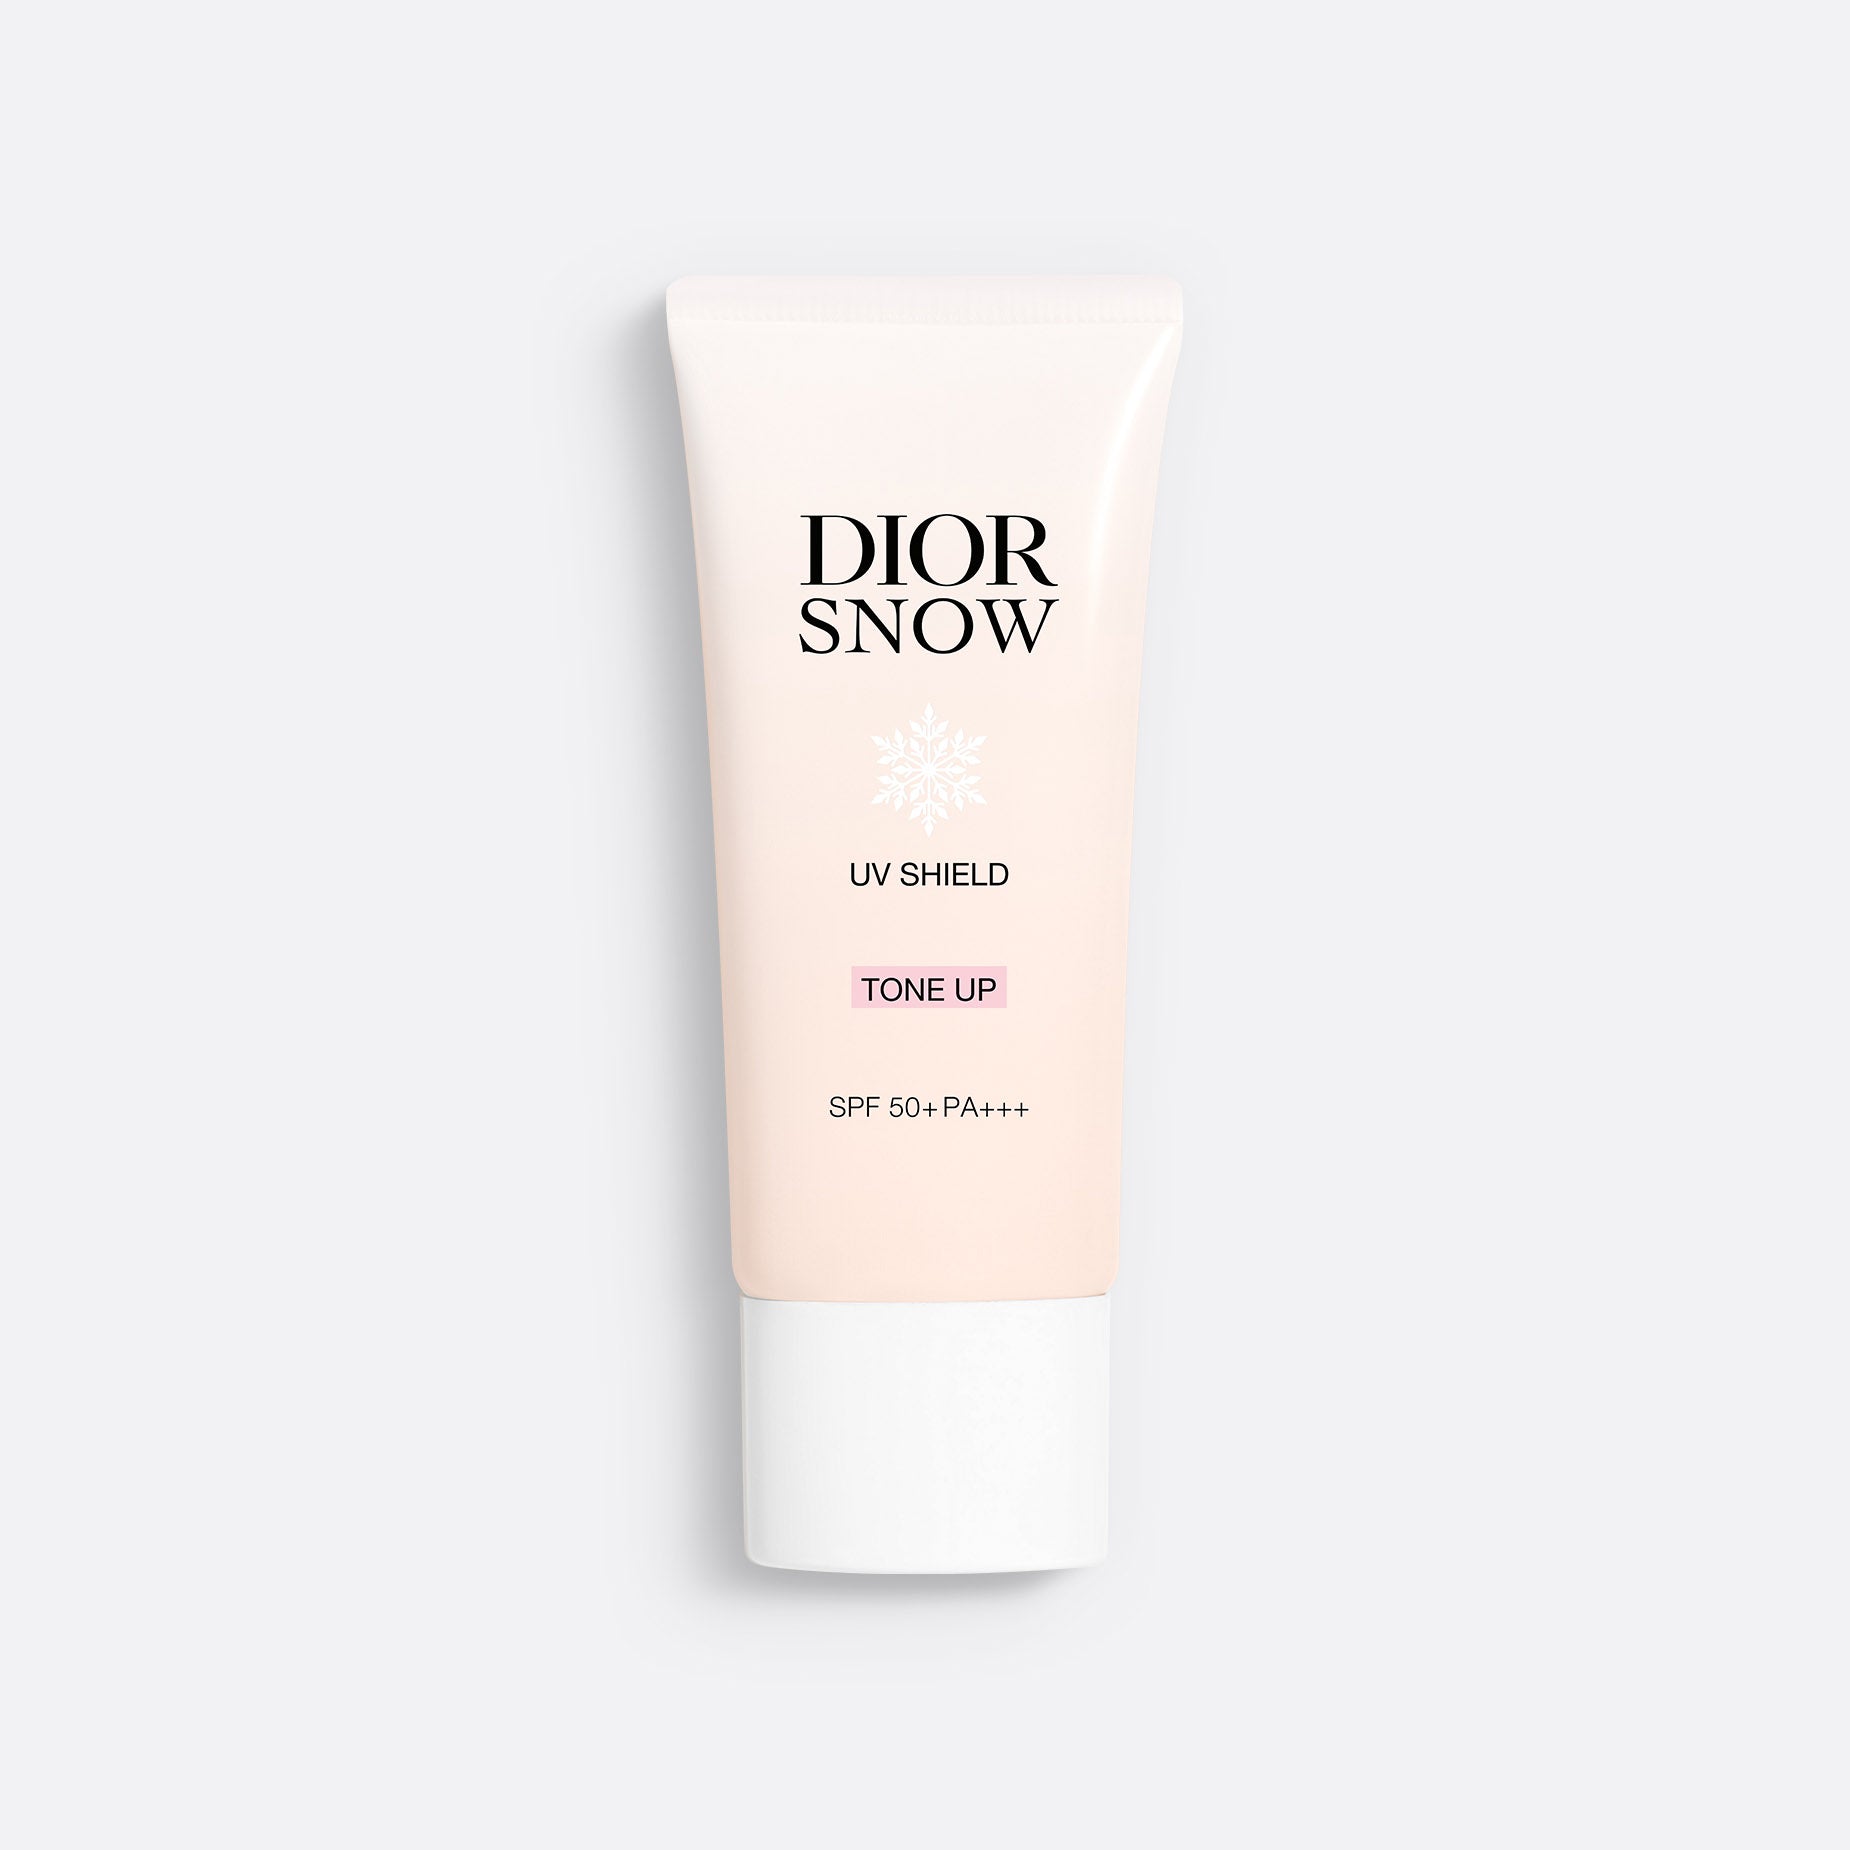 Diorsnow UV Shield Tone Up ~ UV Protection for Face - Tinted Skincare - SPF 50+ PA+++